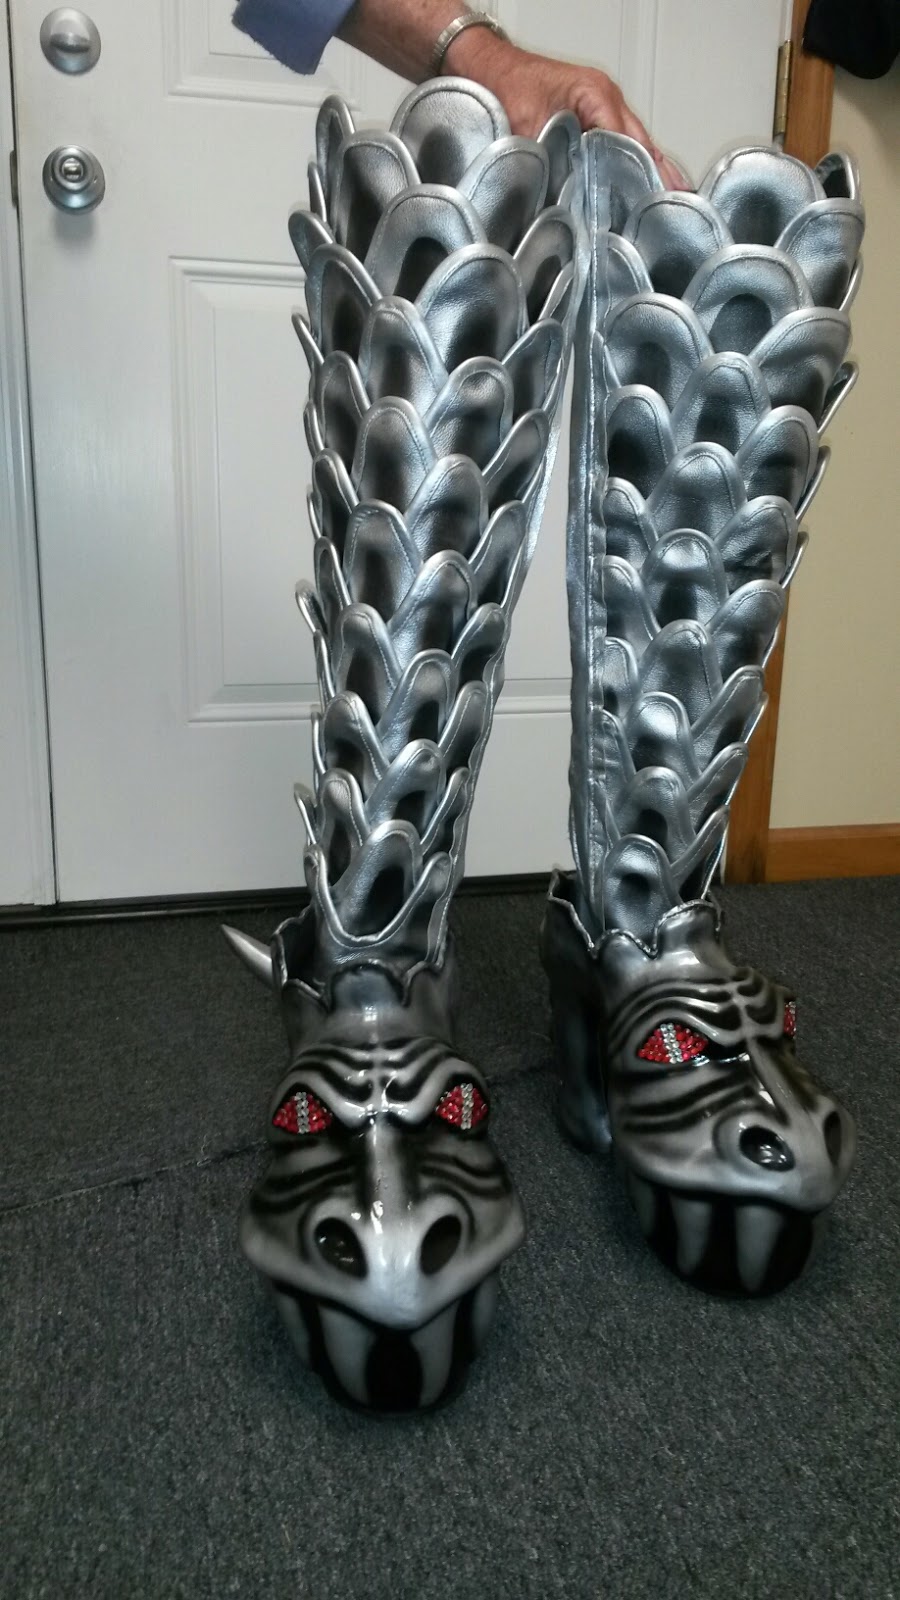 KISS COSTUMES & BOOTS: another pair of DESTROYER gene boots heading home